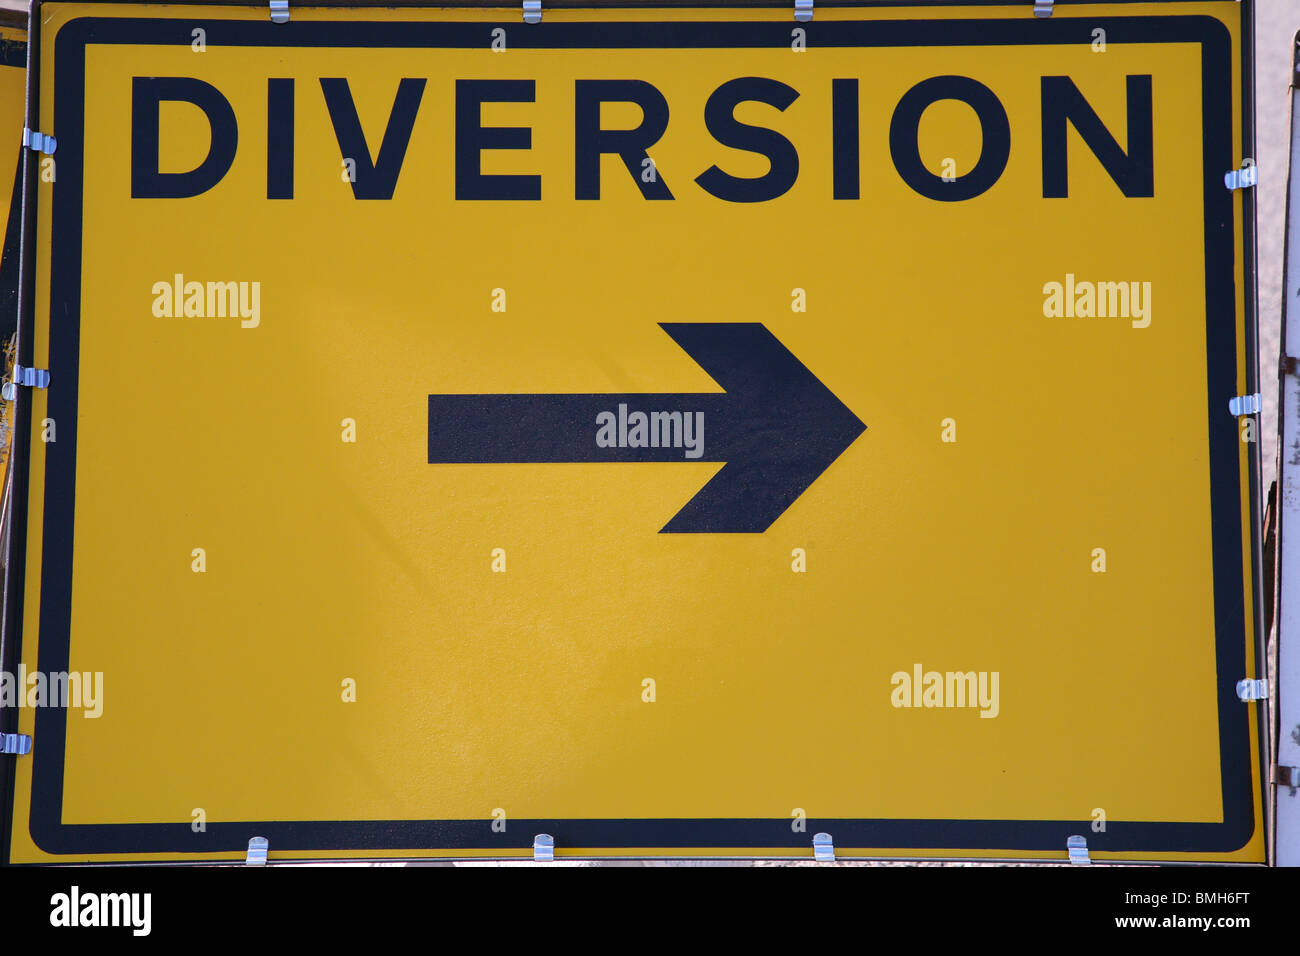 diversion road sign with arrow Stock Photo